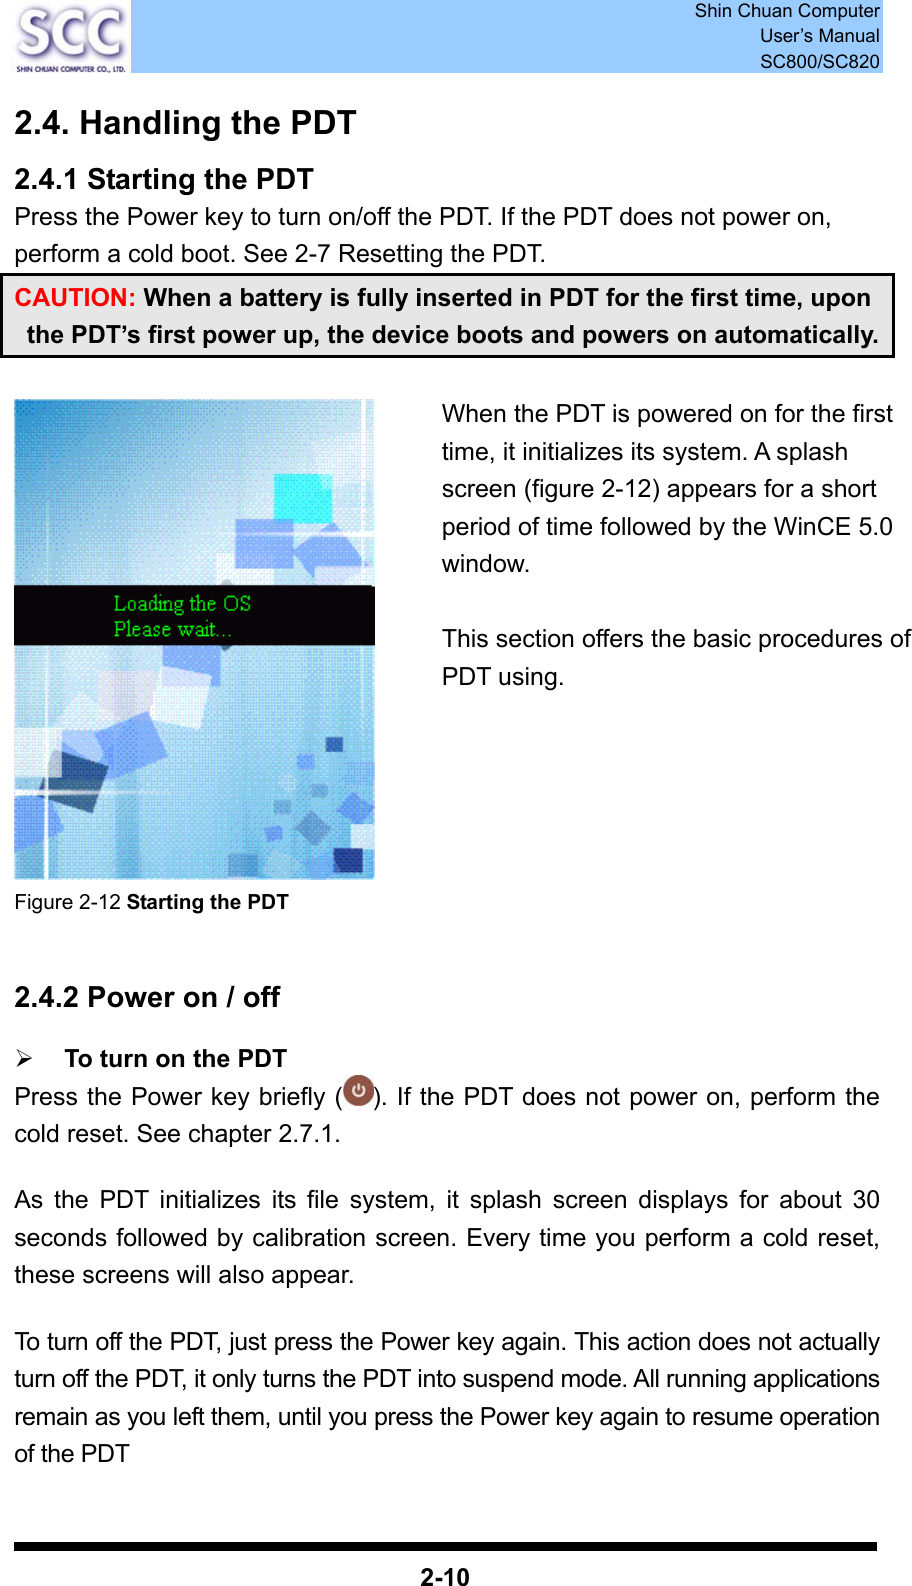  Shin Chuan Computer User’s Manual SC800/SC820  2-10 2.4. Handling the PDT 2.4.1 Starting the PDT Press the Power key to turn on/off the PDT. If the PDT does not power on, perform a cold boot. See 2-7 Resetting the PDT. CAUTION: When a battery is fully inserted in PDT for the first time, upon the PDT’s first power up, the device boots and powers on automatically.   Figure 2-12 Starting the PDT   2.4.2 Power on / off  ¾ To turn on the PDT Press the Power key briefly ( ). If the PDT does not power on, perform the cold reset. See chapter 2.7.1.  As the PDT initializes its file system, it splash screen displays for about 30 seconds followed by calibration screen. Every time you perform a cold reset, these screens will also appear.  To turn off the PDT, just press the Power key again. This action does not actually turn off the PDT, it only turns the PDT into suspend mode. All running applications remain as you left them, until you press the Power key again to resume operation of the PDT  When the PDT is powered on for the first time, it initializes its system. A splash screen (figure 2-12) appears for a short period of time followed by the WinCE 5.0 window.   This section offers the basic procedures of PDT using.  